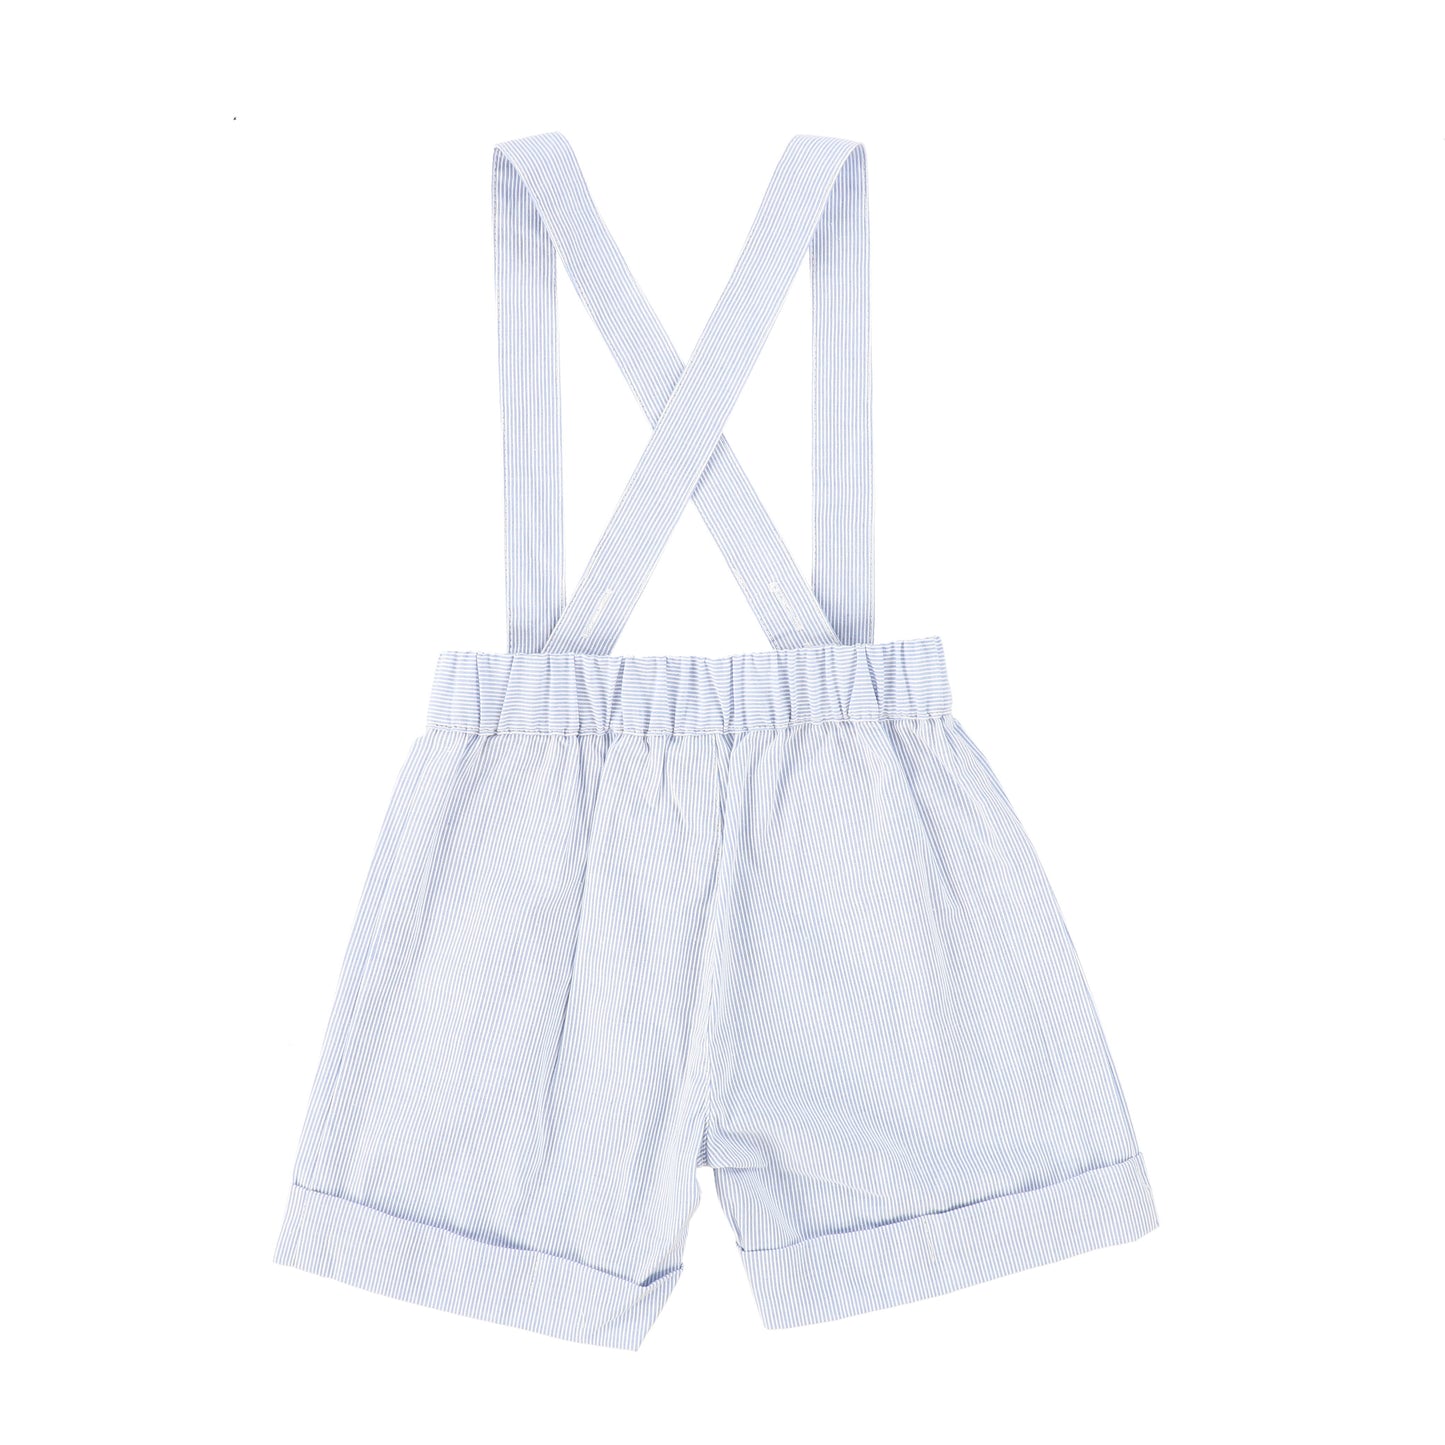 BACE COLLECTION LIGHT BLUE THIN STRIPED SUSPENDER SHORTS [FINAL SALE]